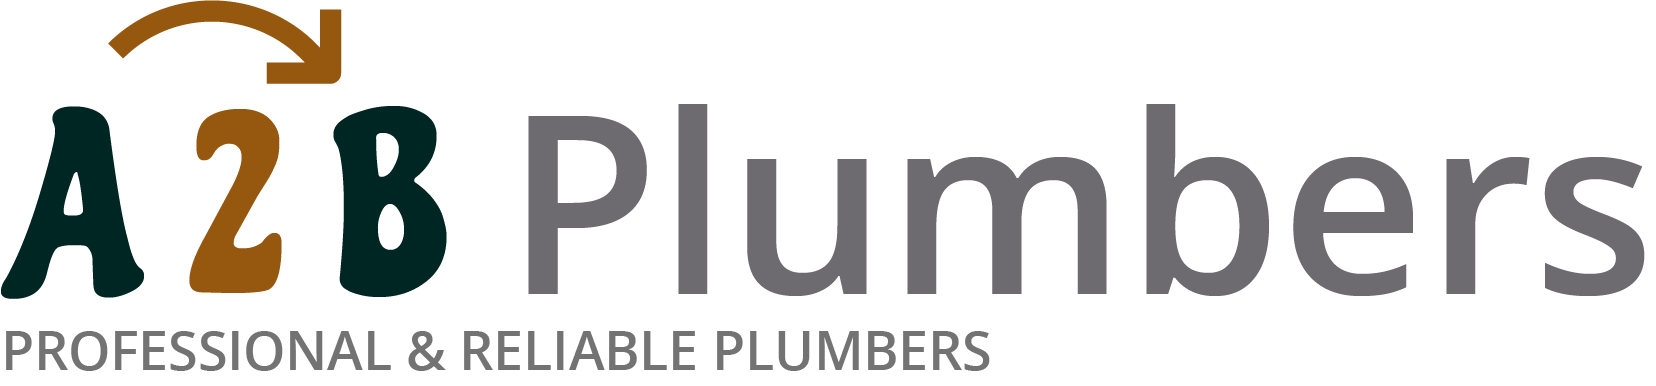 If you need a boiler installed, a radiator repaired or a leaking tap fixed, call us now - we provide services for properties in Adur and the local area.